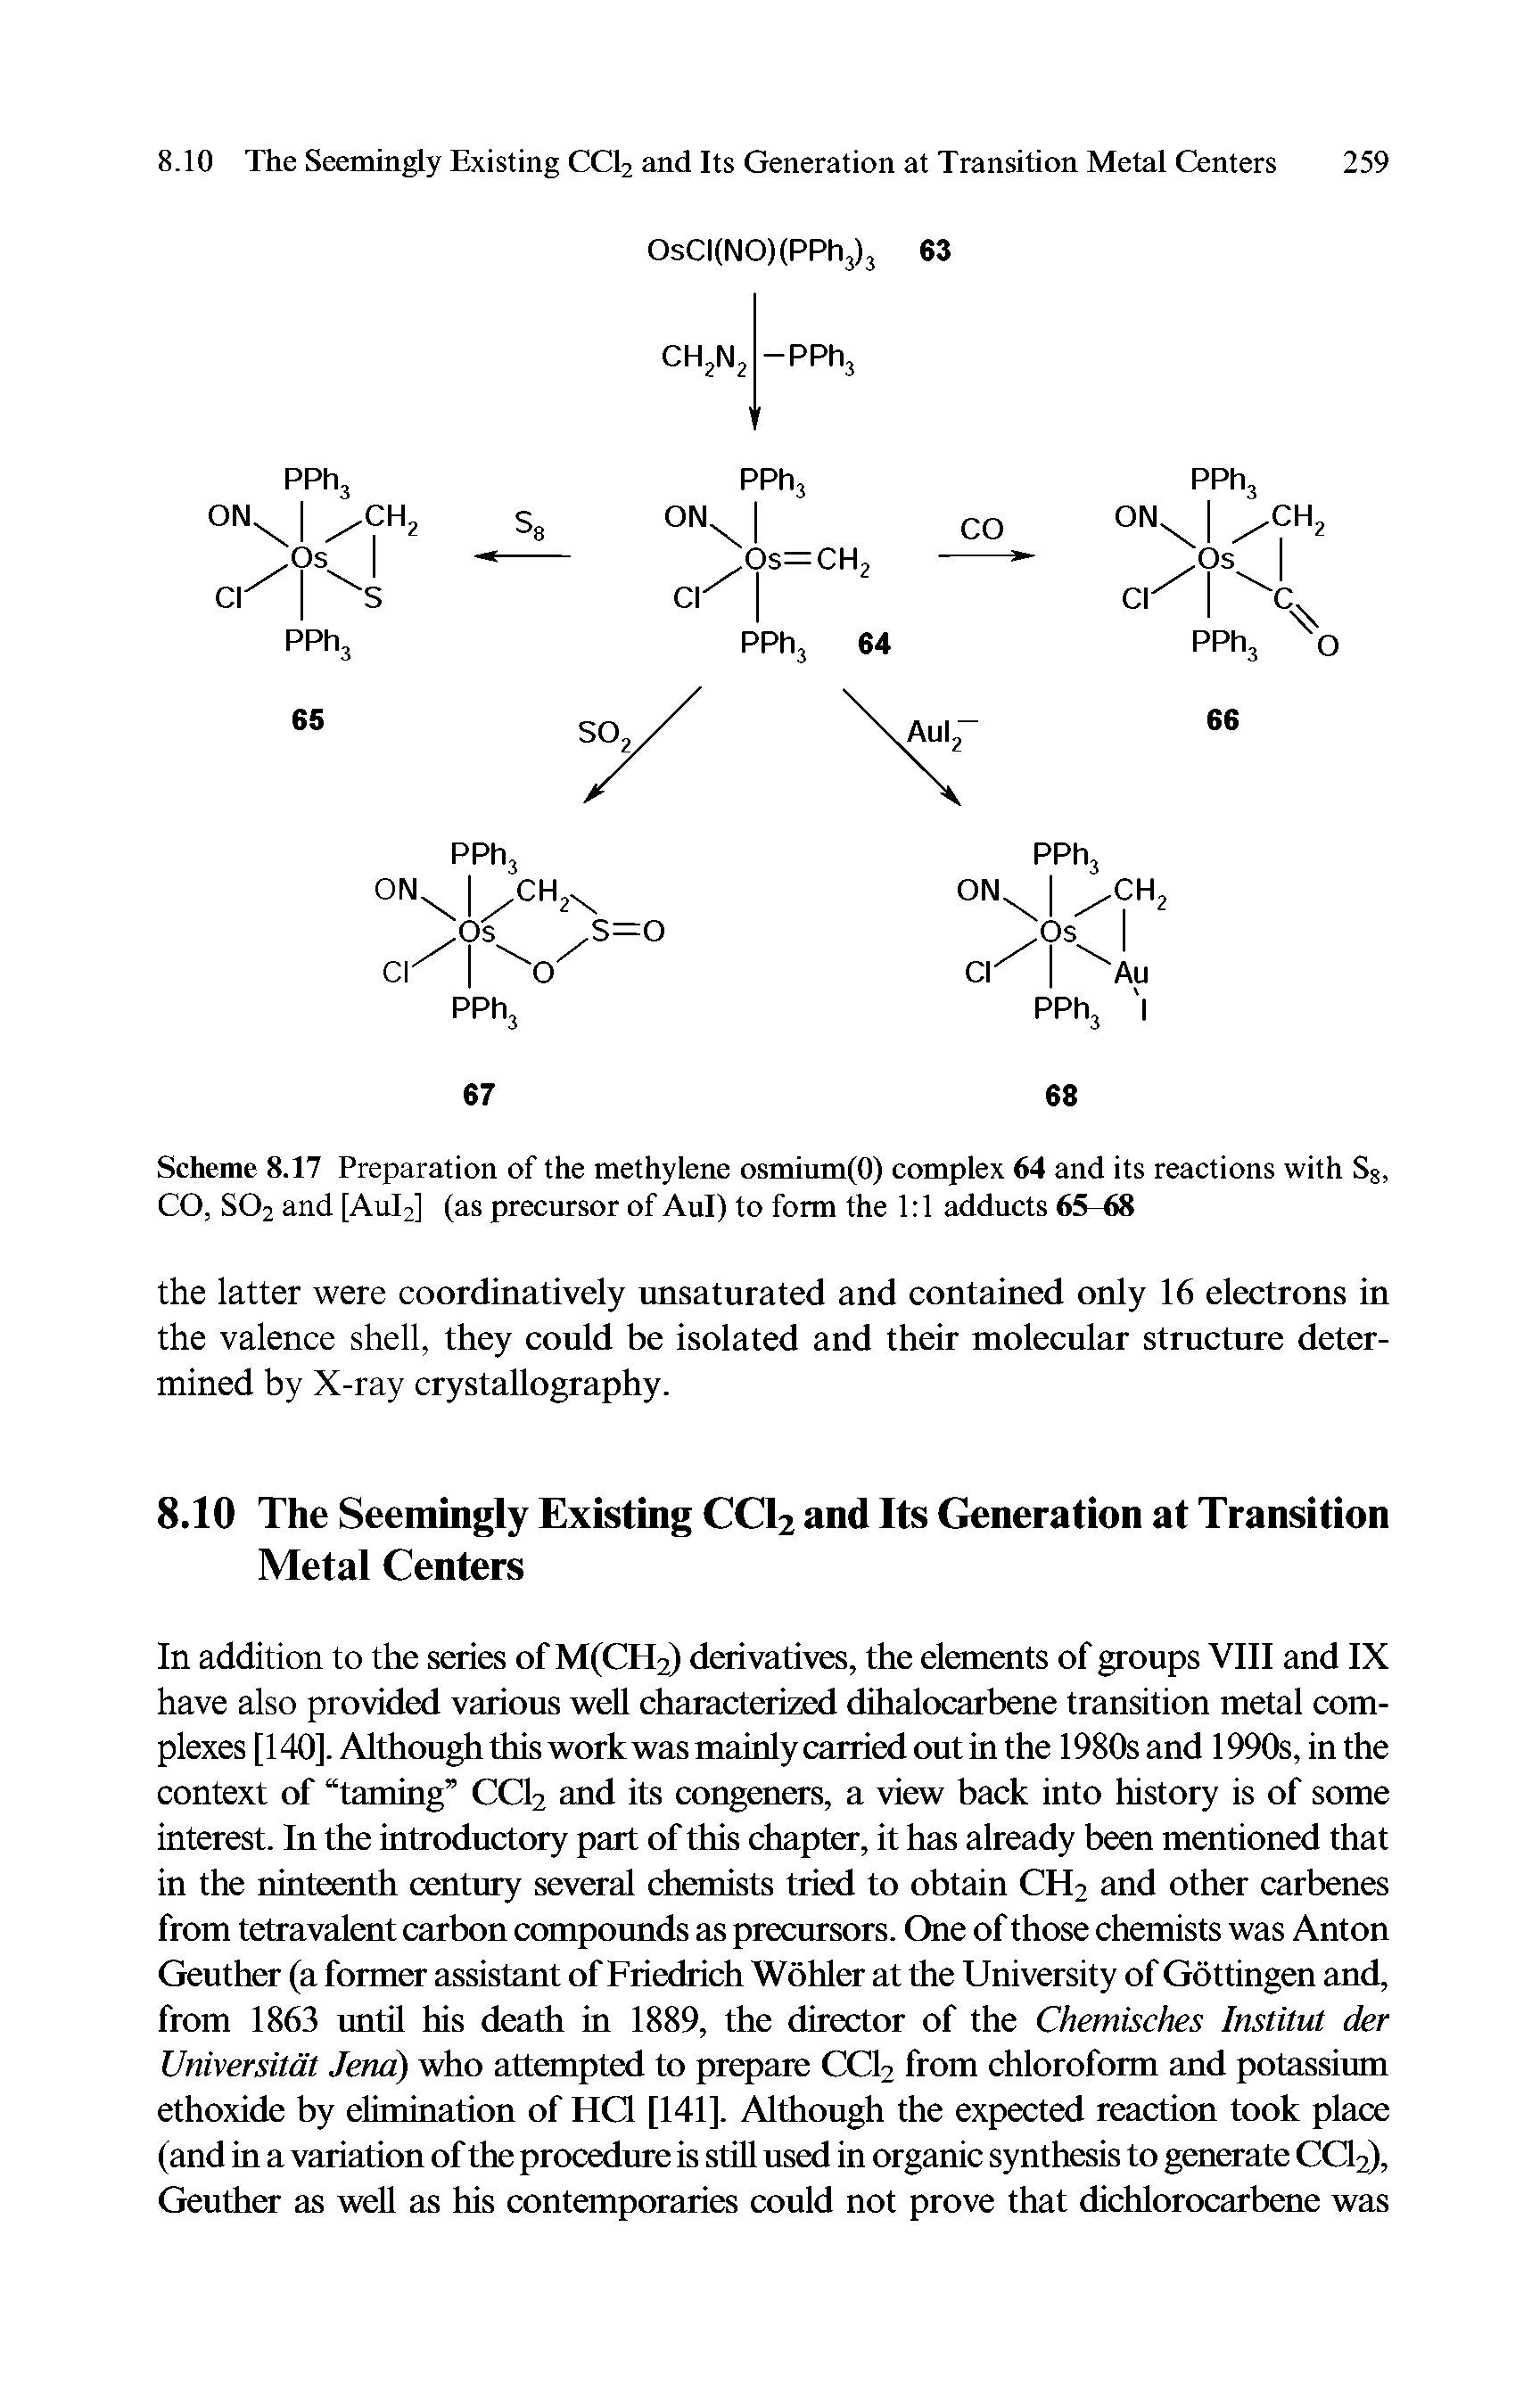 Scheme 8.17 Preparation of the methylene osmium(O) complex 64 and its reactions with S8, CO, S02 and [Aul2] (as precursor of Aul) to form the 1 1 adducts 65-68...